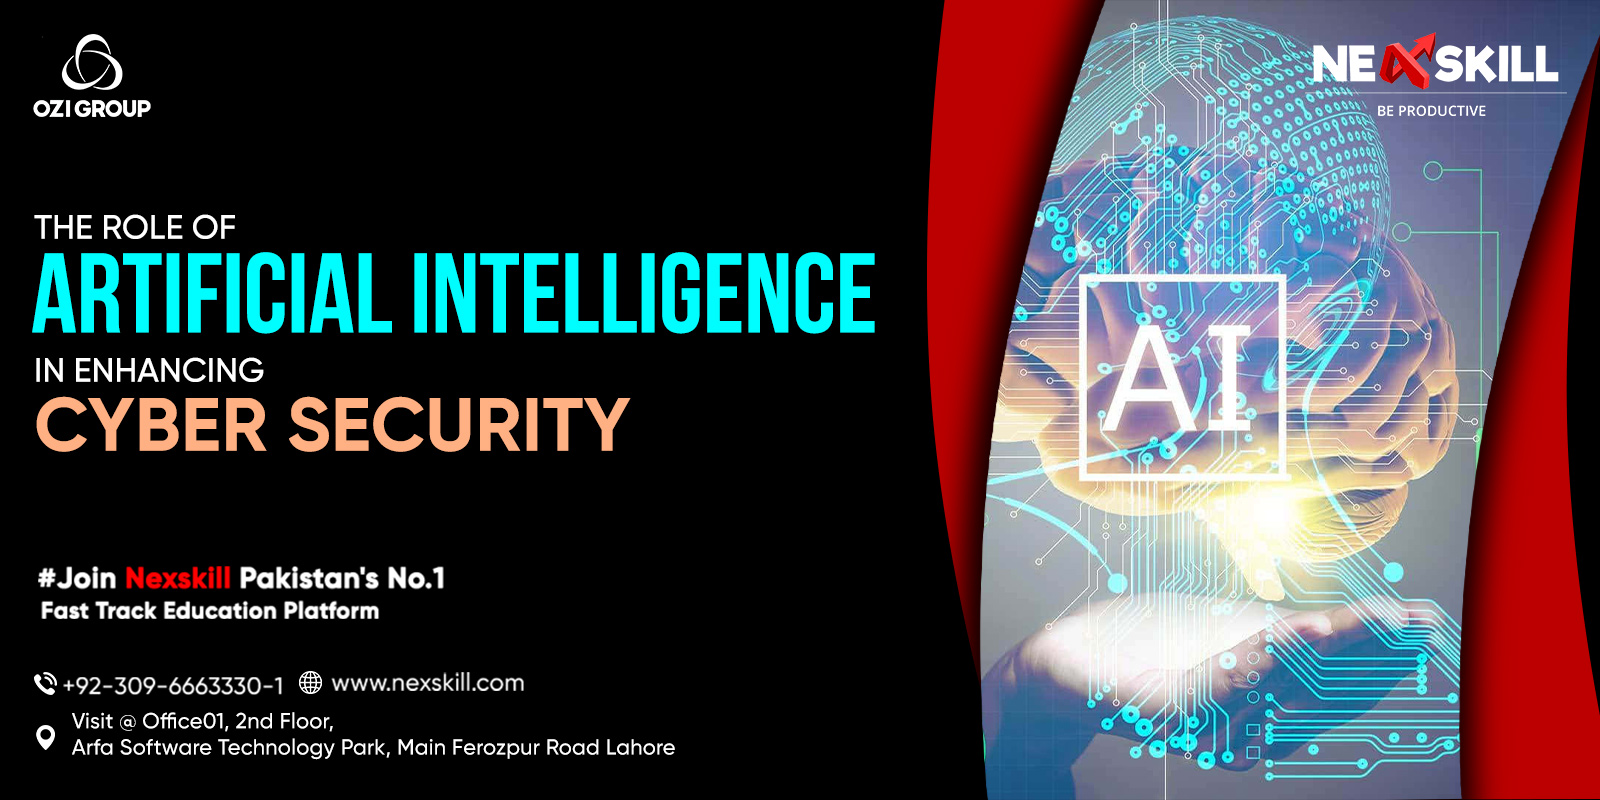 The Role of Artificial Intelligence in Enhancing Cyber Security